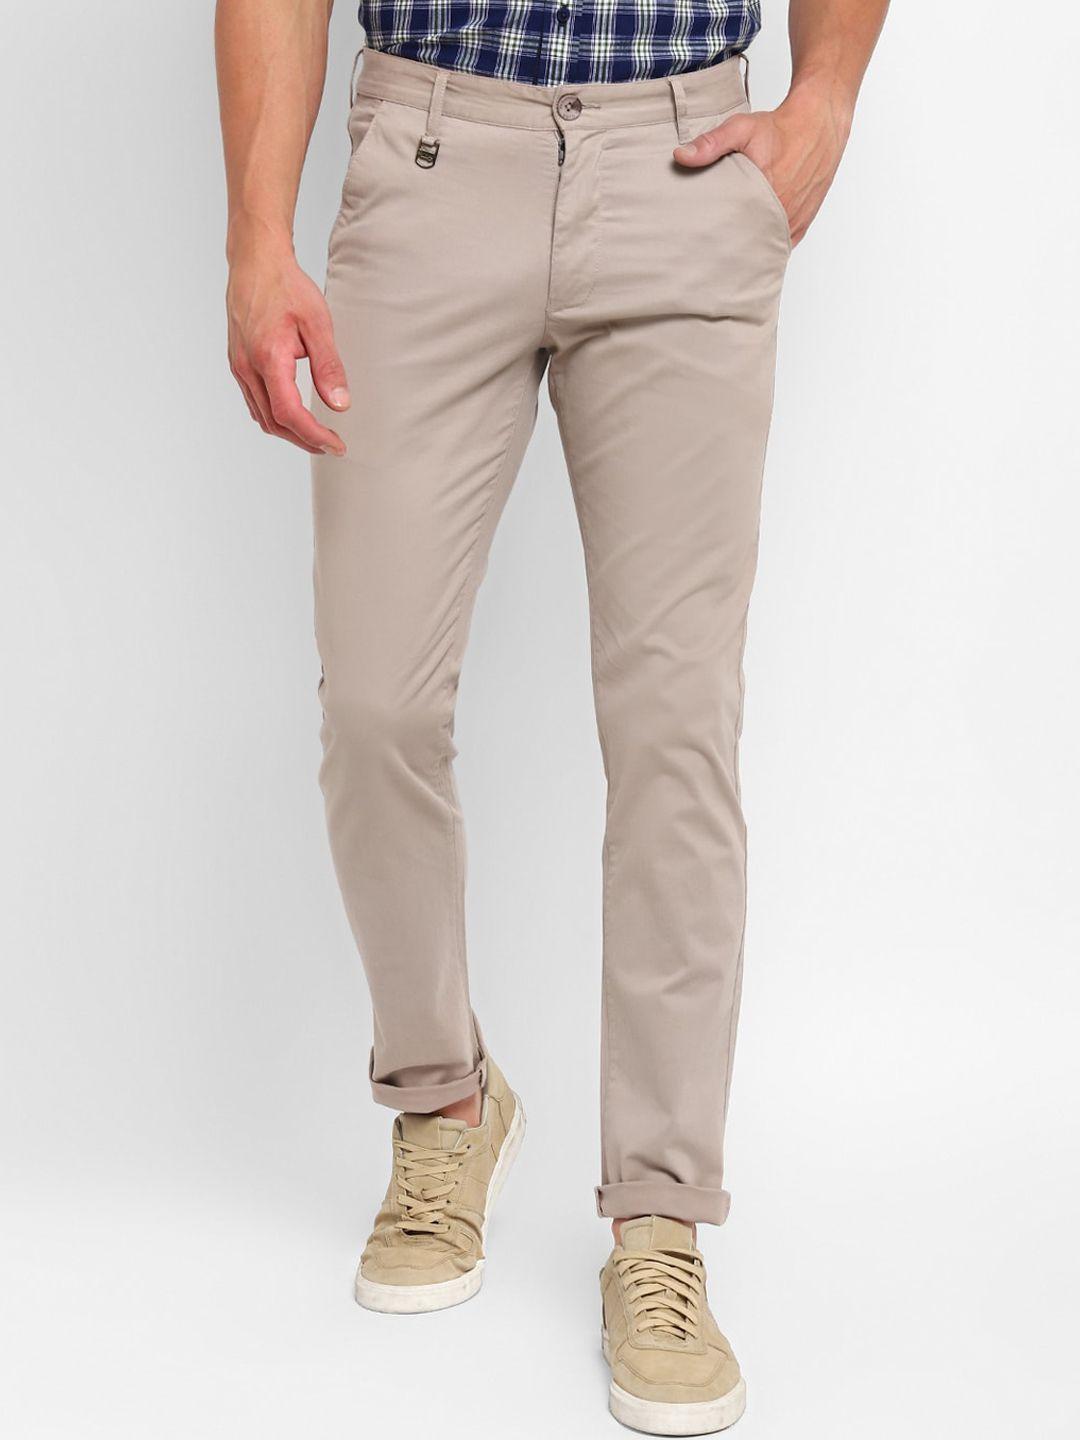 red-chief-men-slim-fit-mid-rise-trousers